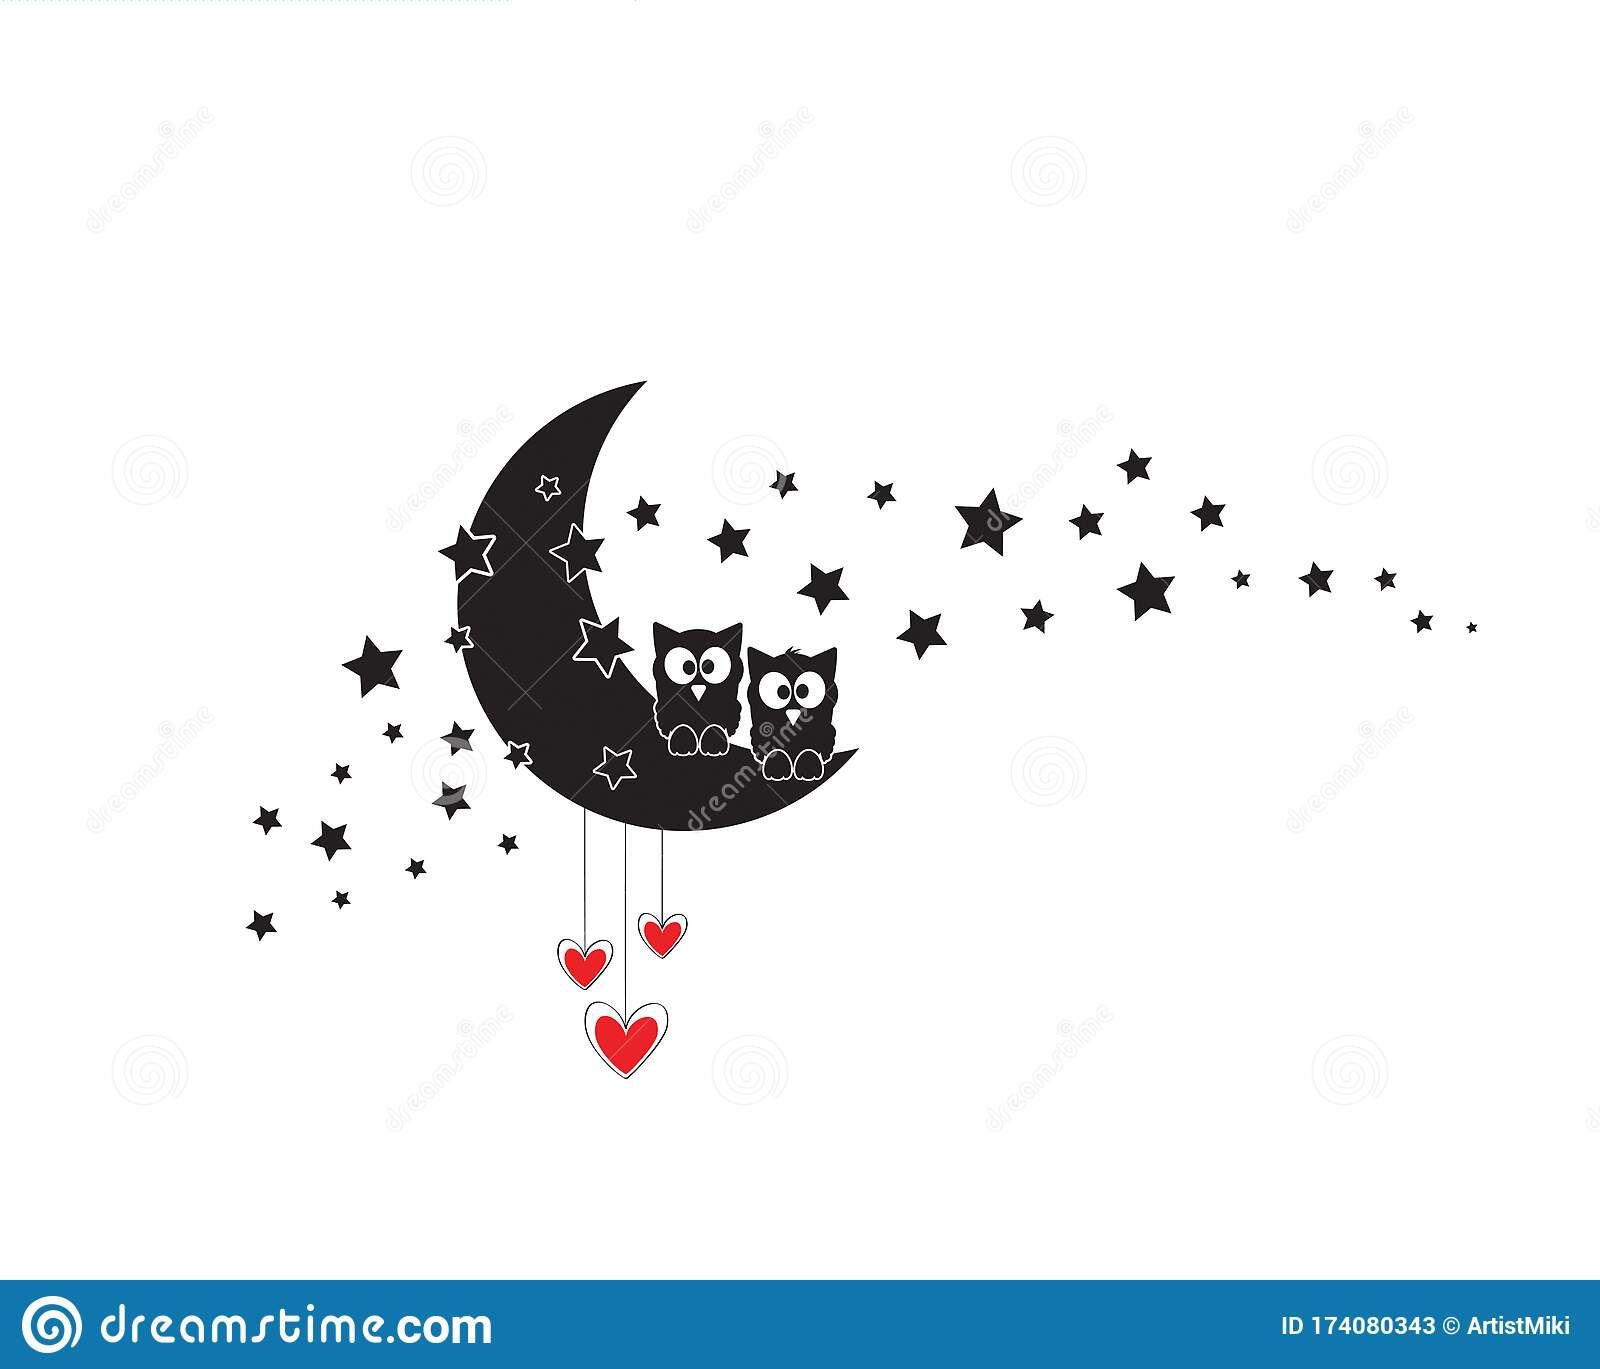 Two Owls On The Moon With Stars And Hearts Illustration, Vector (View 15 of 15)